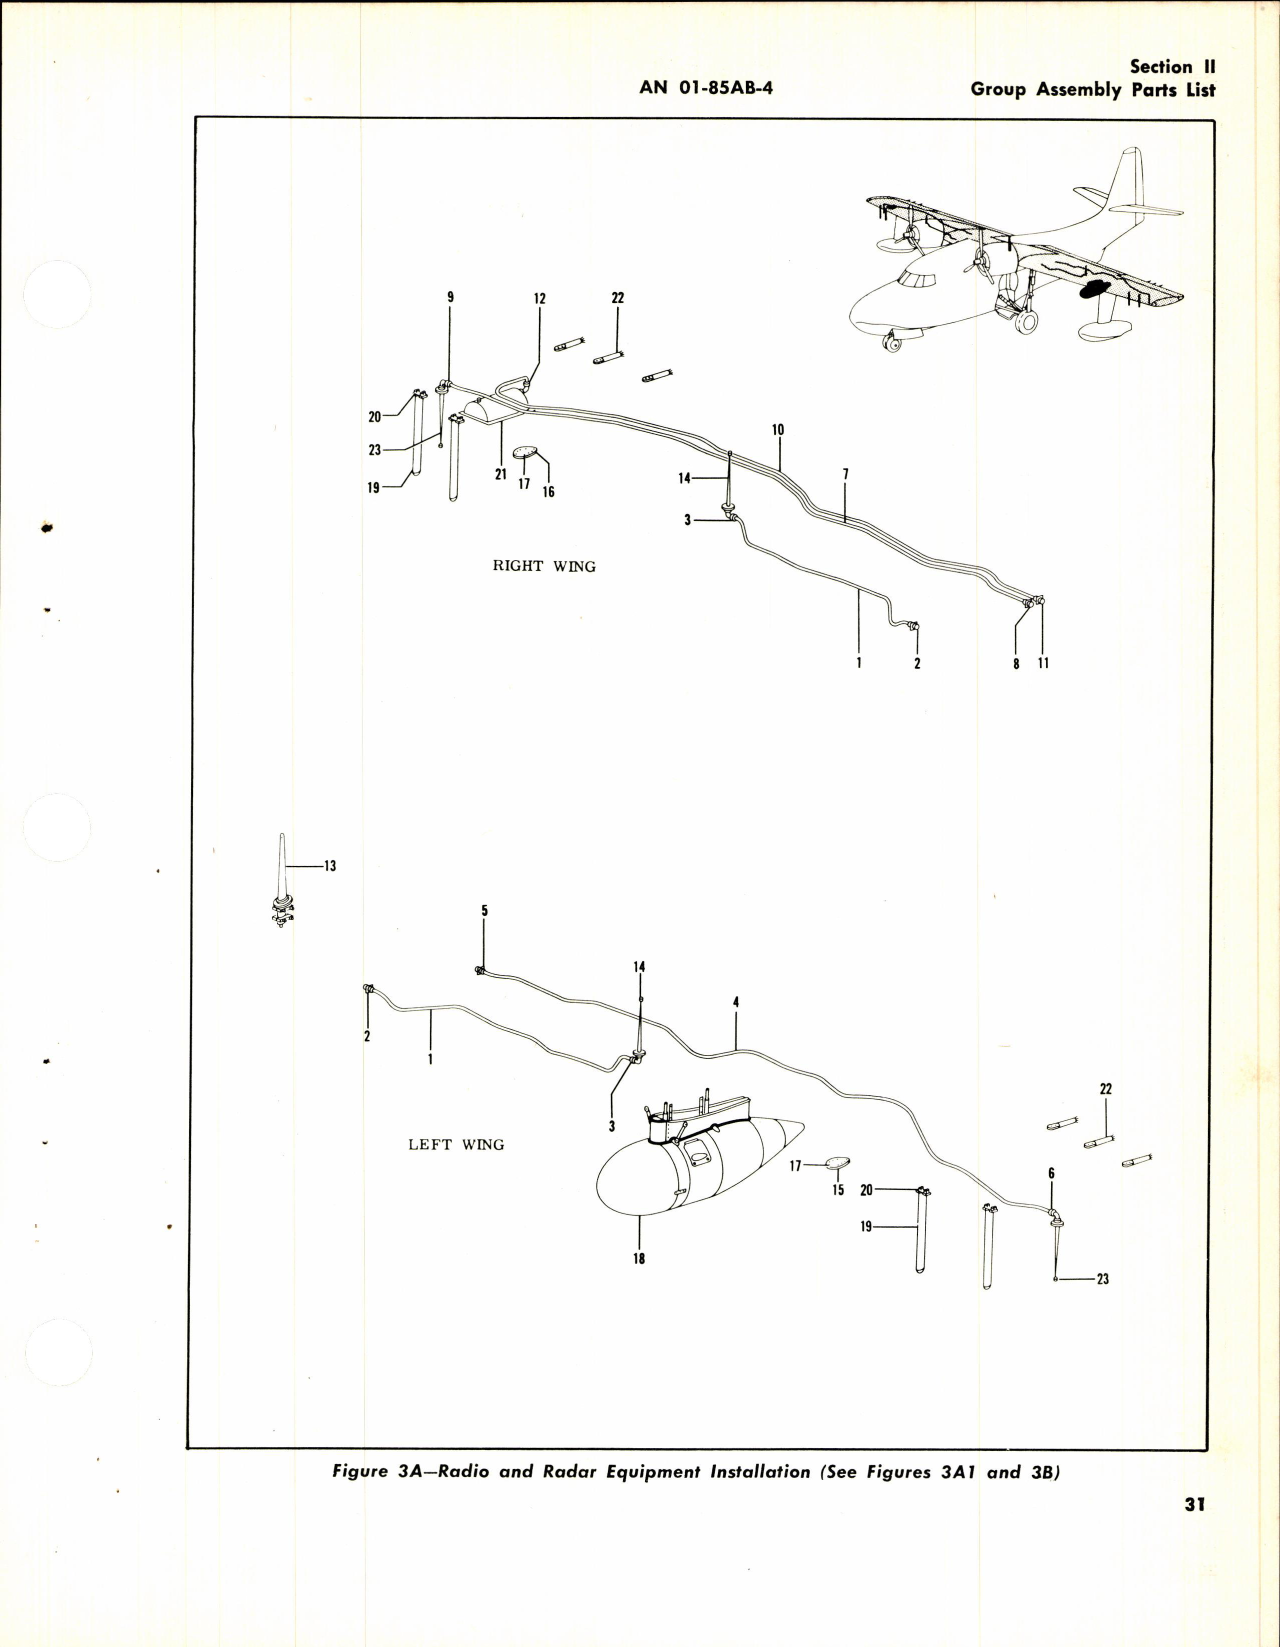 Sample page 47 from AirCorps Library document: Parts Catalog for SA-16A-GR, UF-1, and UF-1T Aircraft